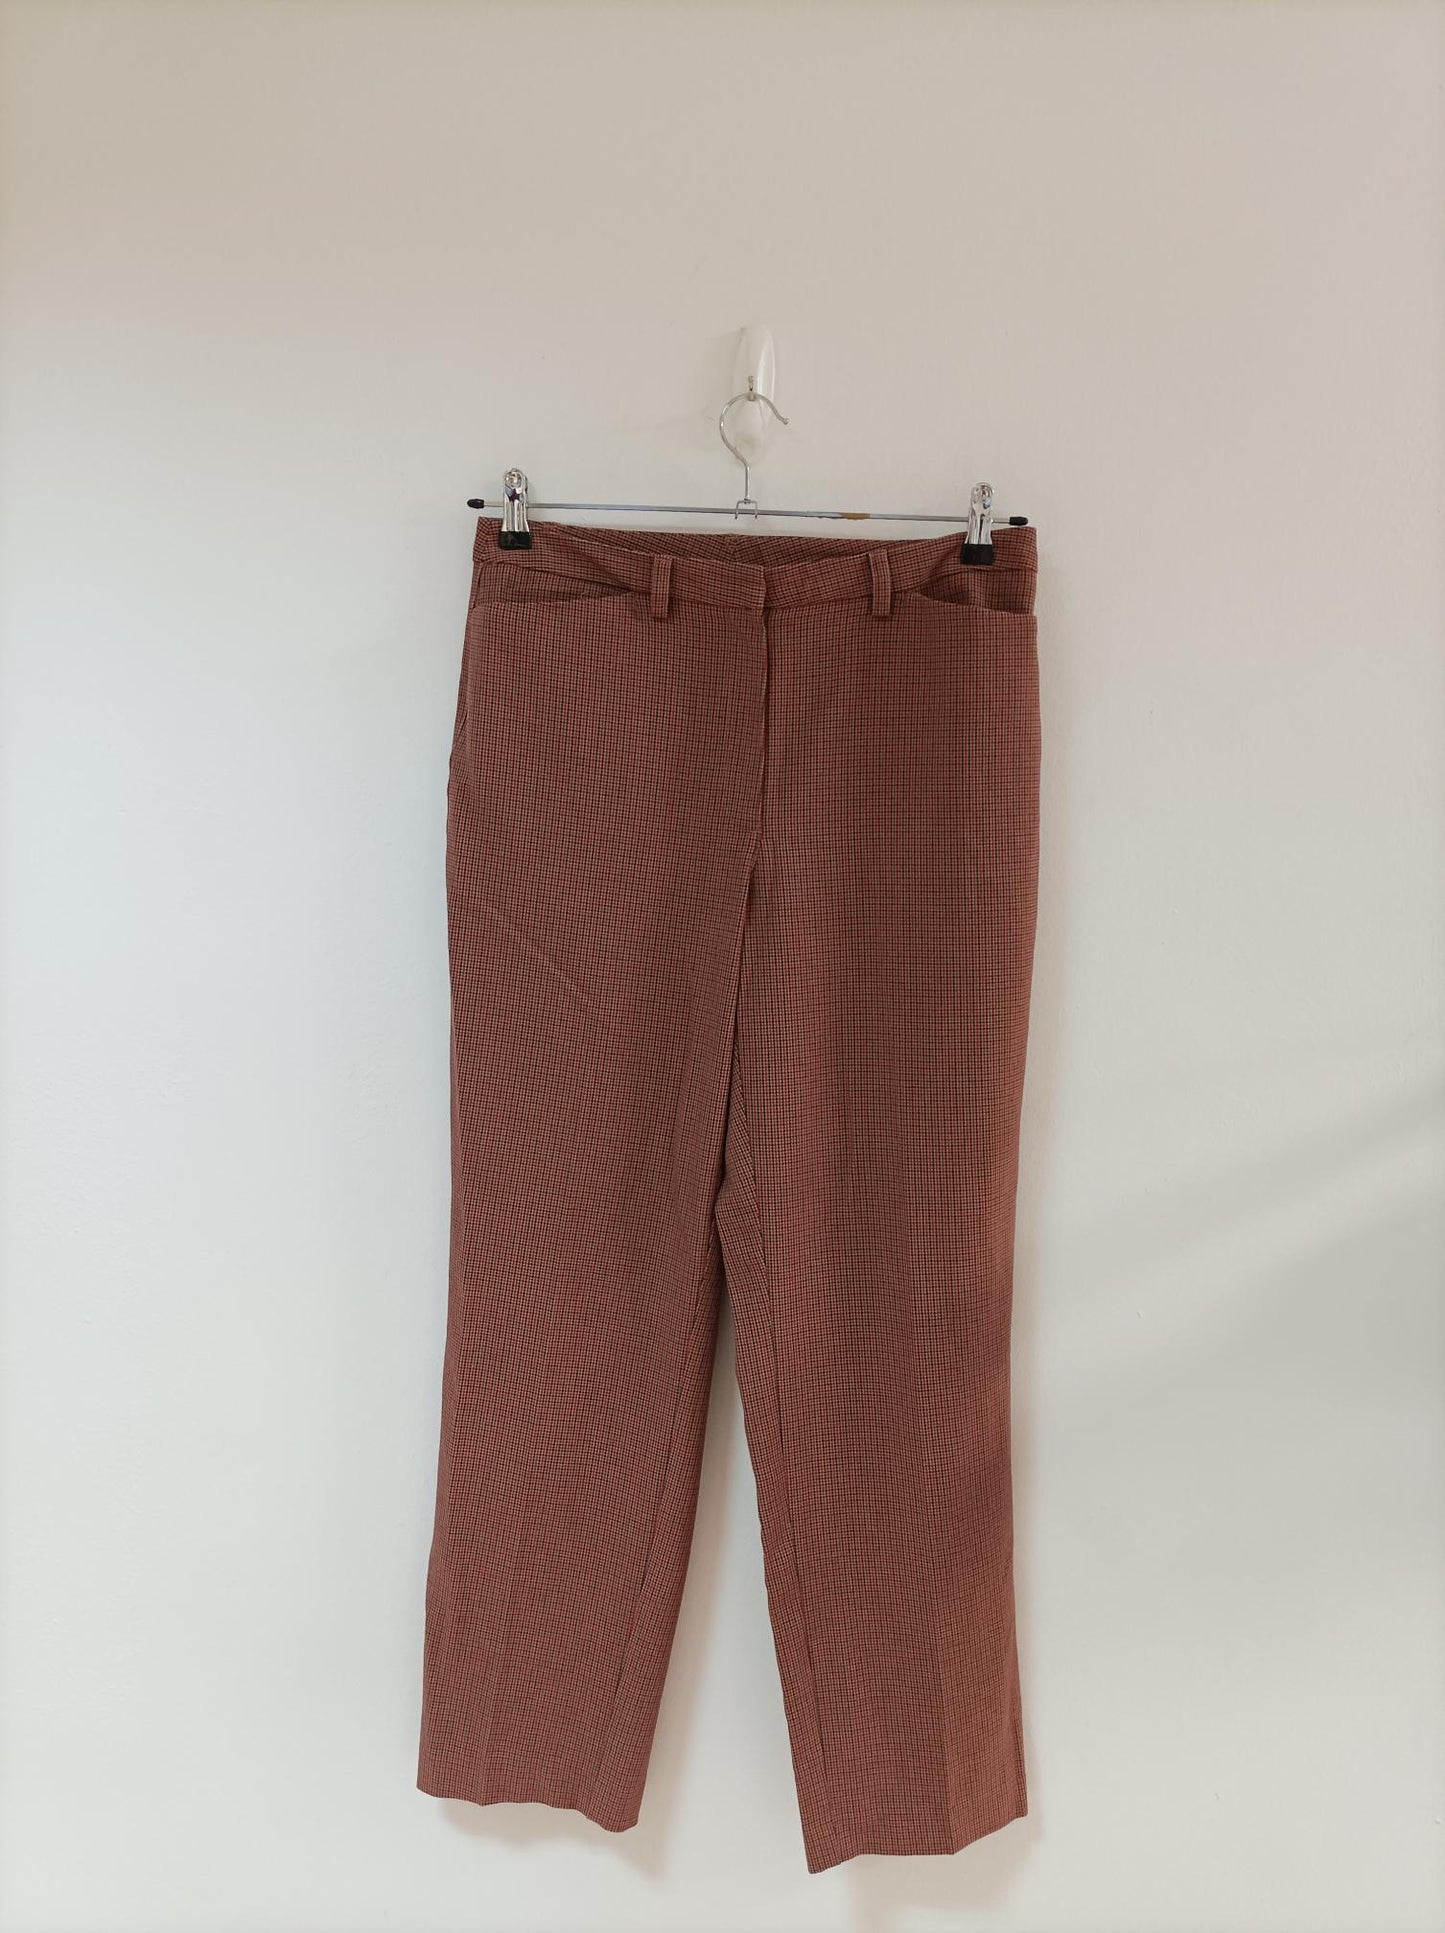 Red, Black and Beige Houndstooth Straight Trousers, Liz Claiborne, Size 14 (petite) - Damaged Item Sale